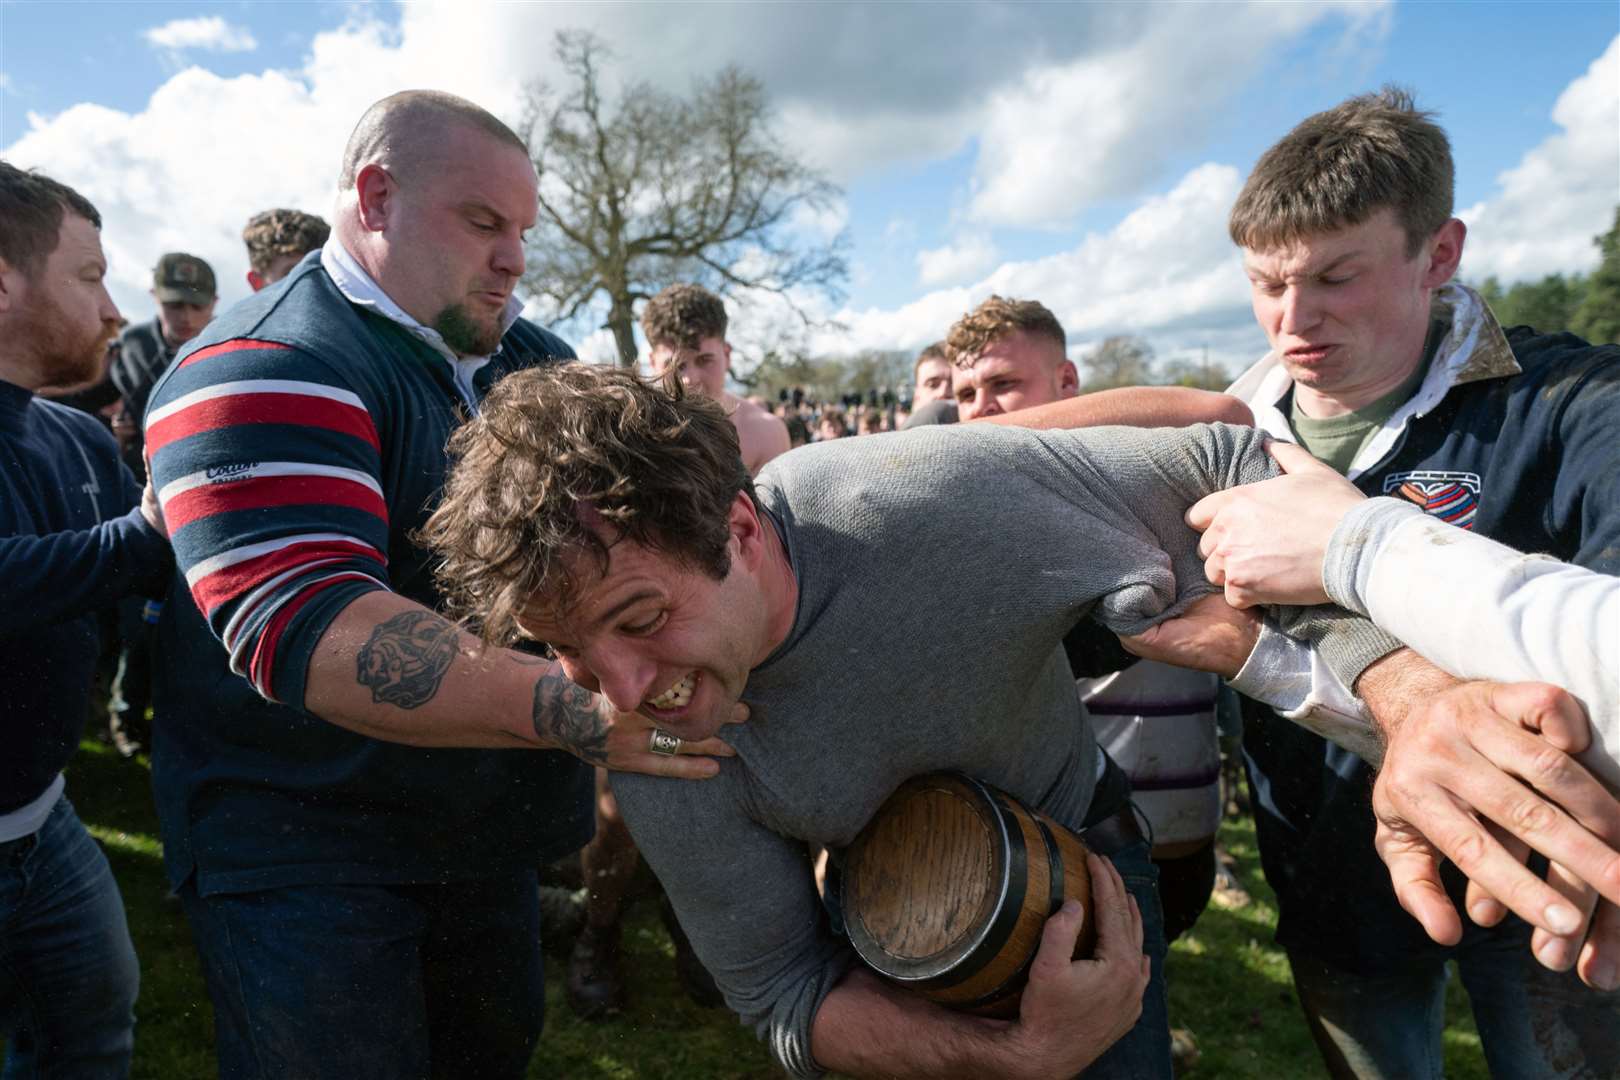 Players from the villages of Hallaton and Medbourne battle for the ‘bottle’, an old field barrel holding about a gallon of beer, during the annual game of bottle-kicking in Leicestershire in April (PA)